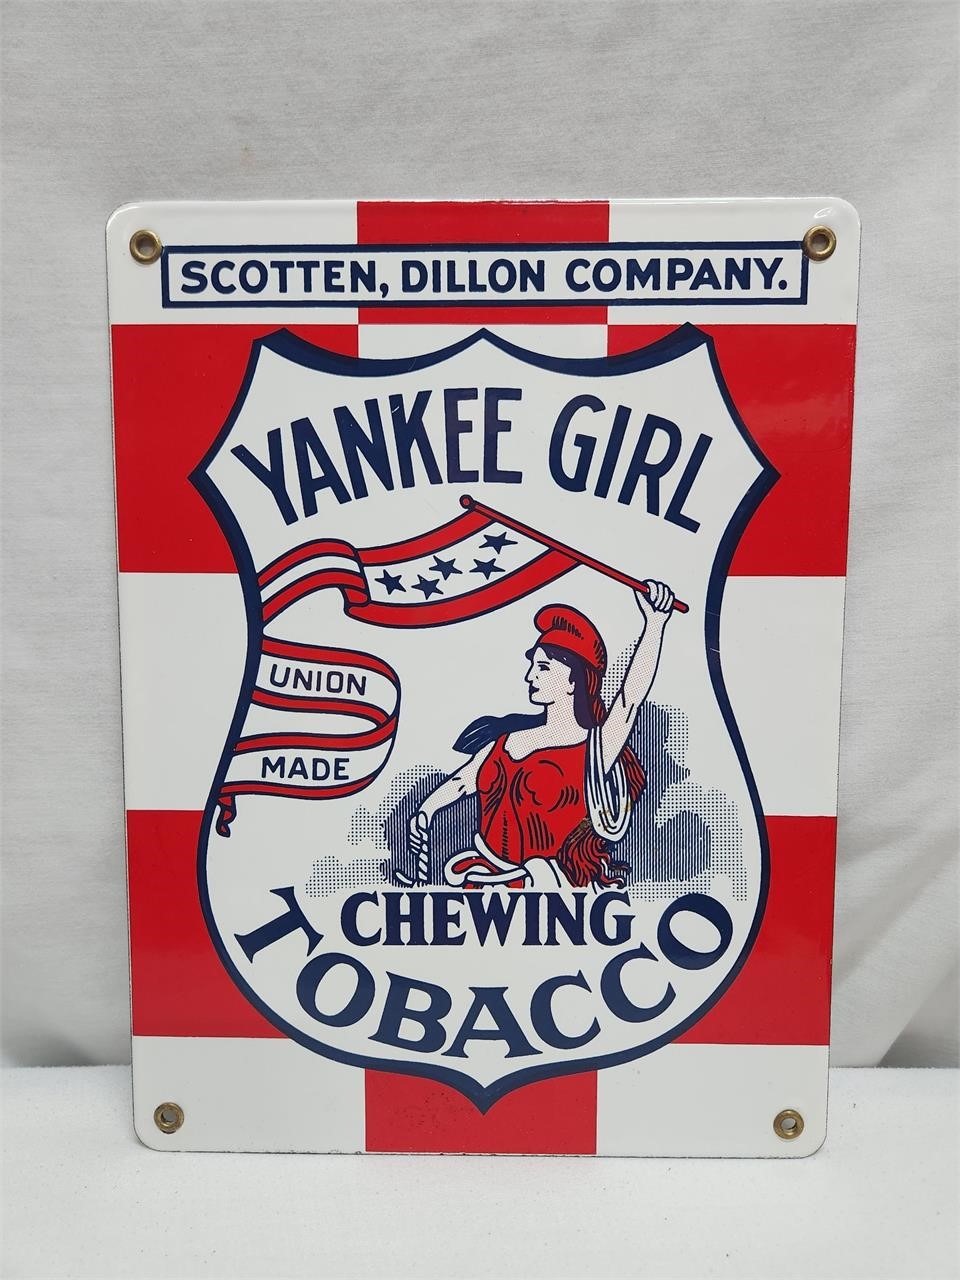 All Metal Signs (2)